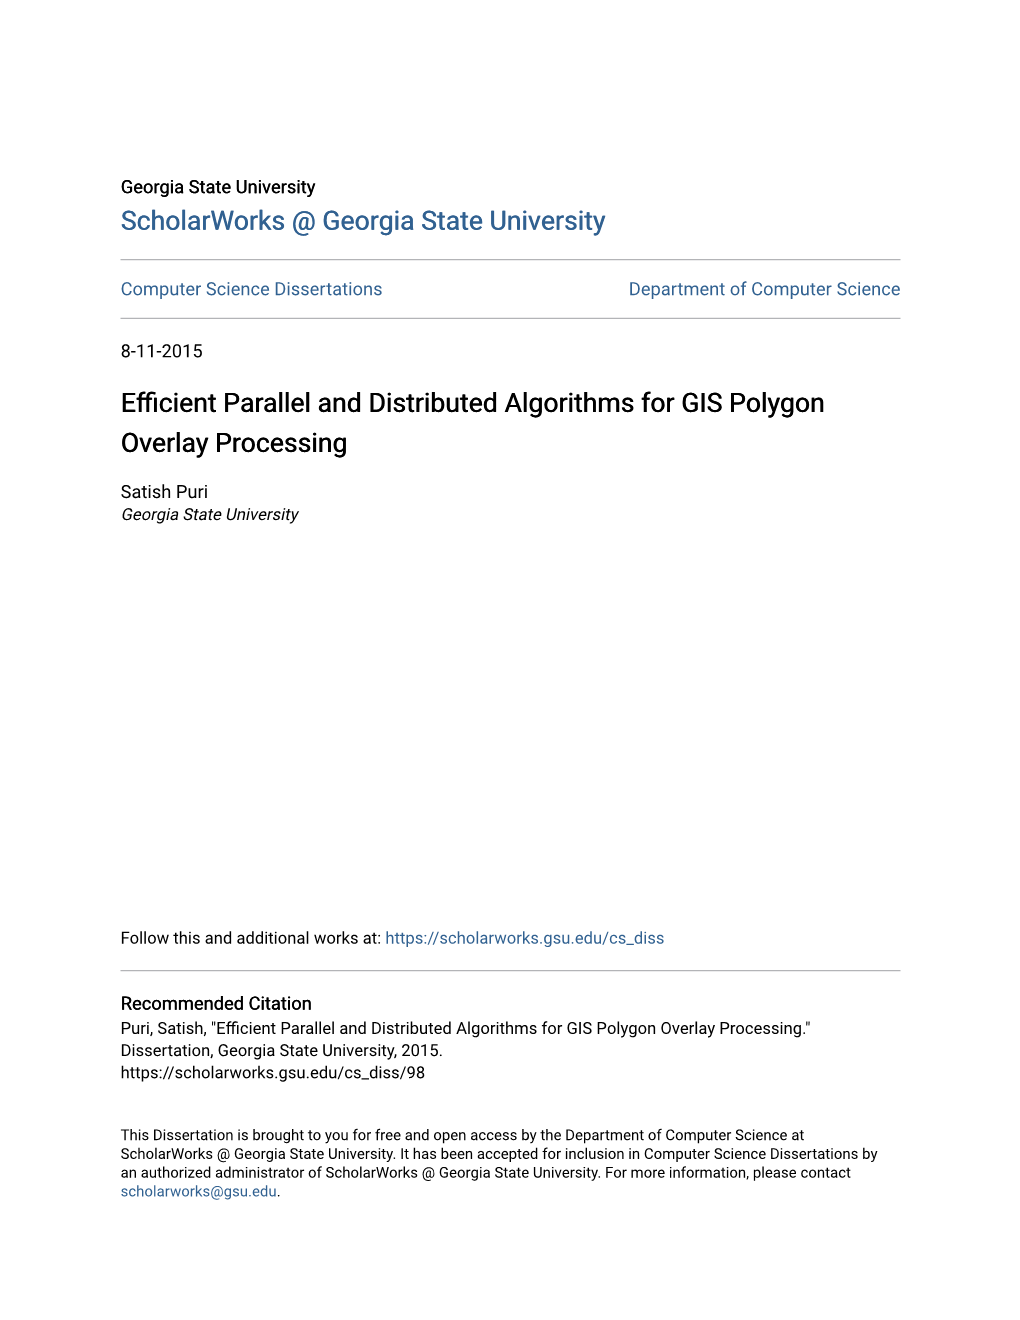 Efficient Parallel and Distributed Algorithms for GIS Polygon Overlay Processing